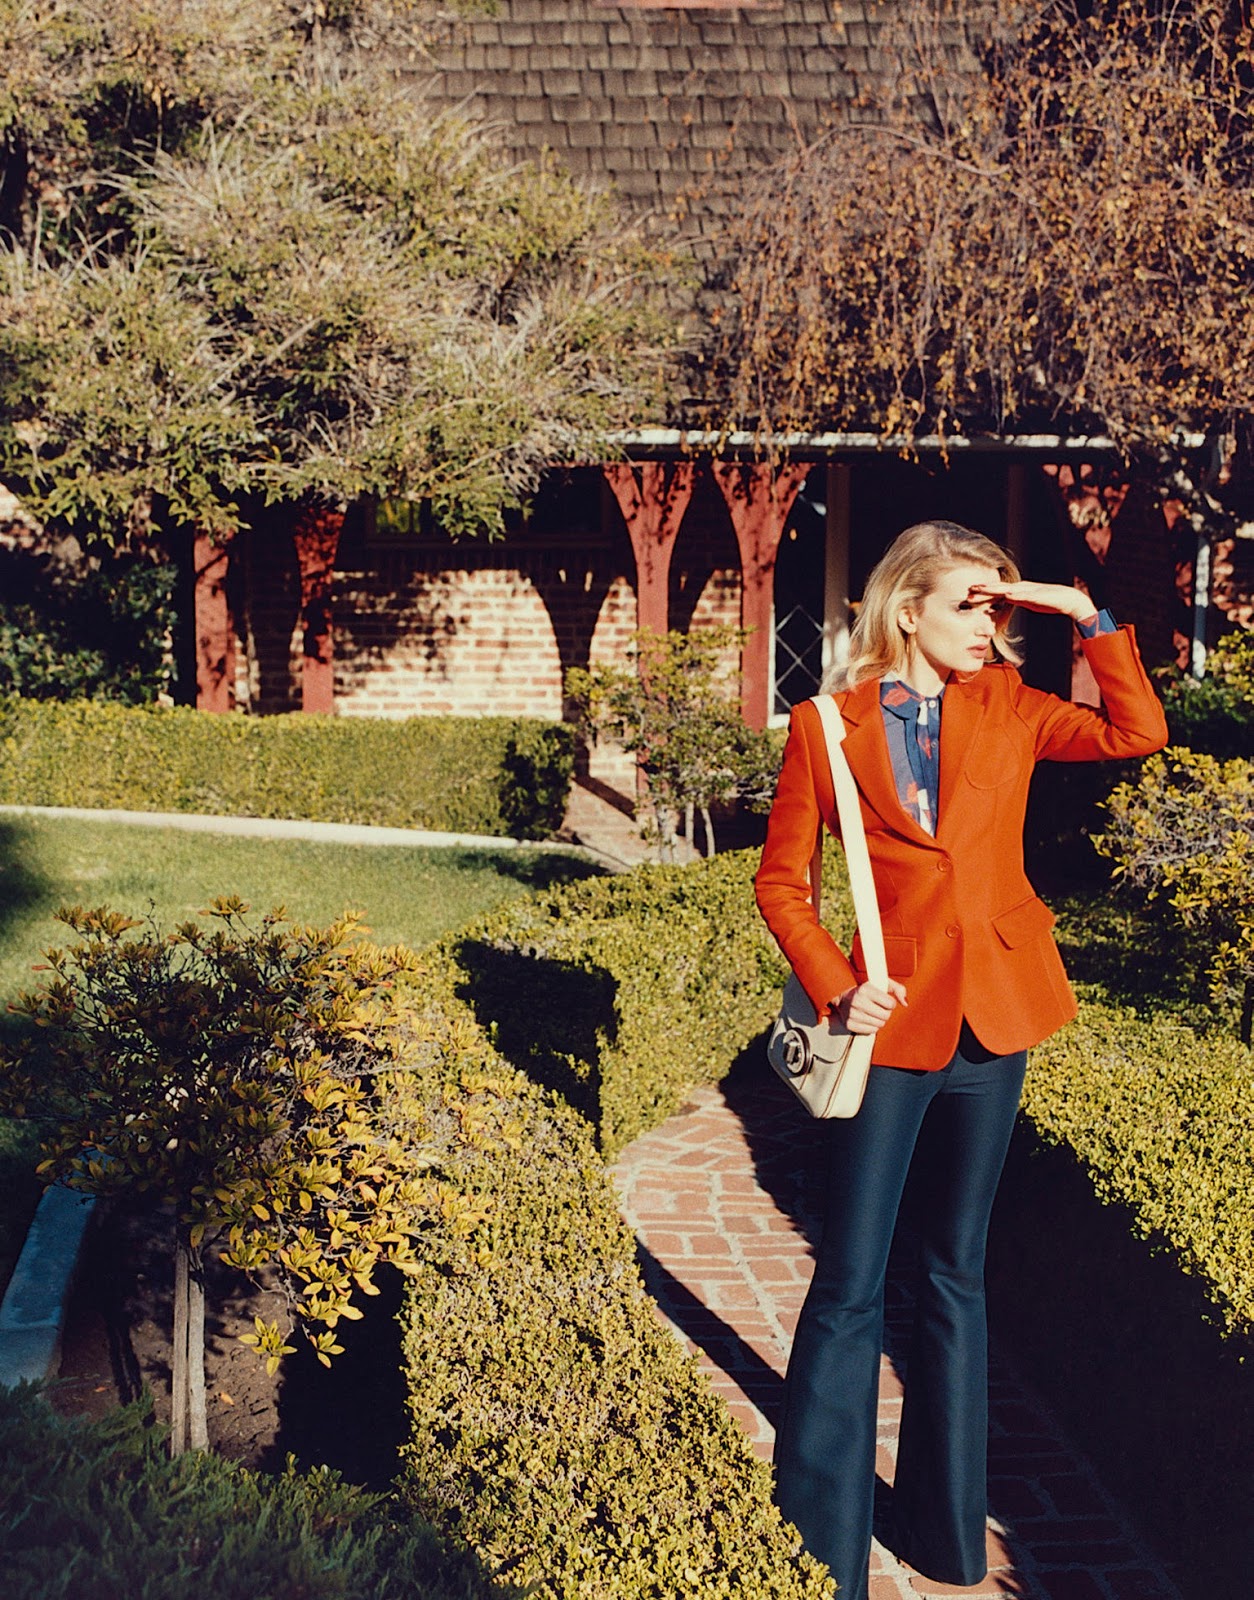 lily donaldson by tom craig for porter #8 summer 2015 | visual optimism ...